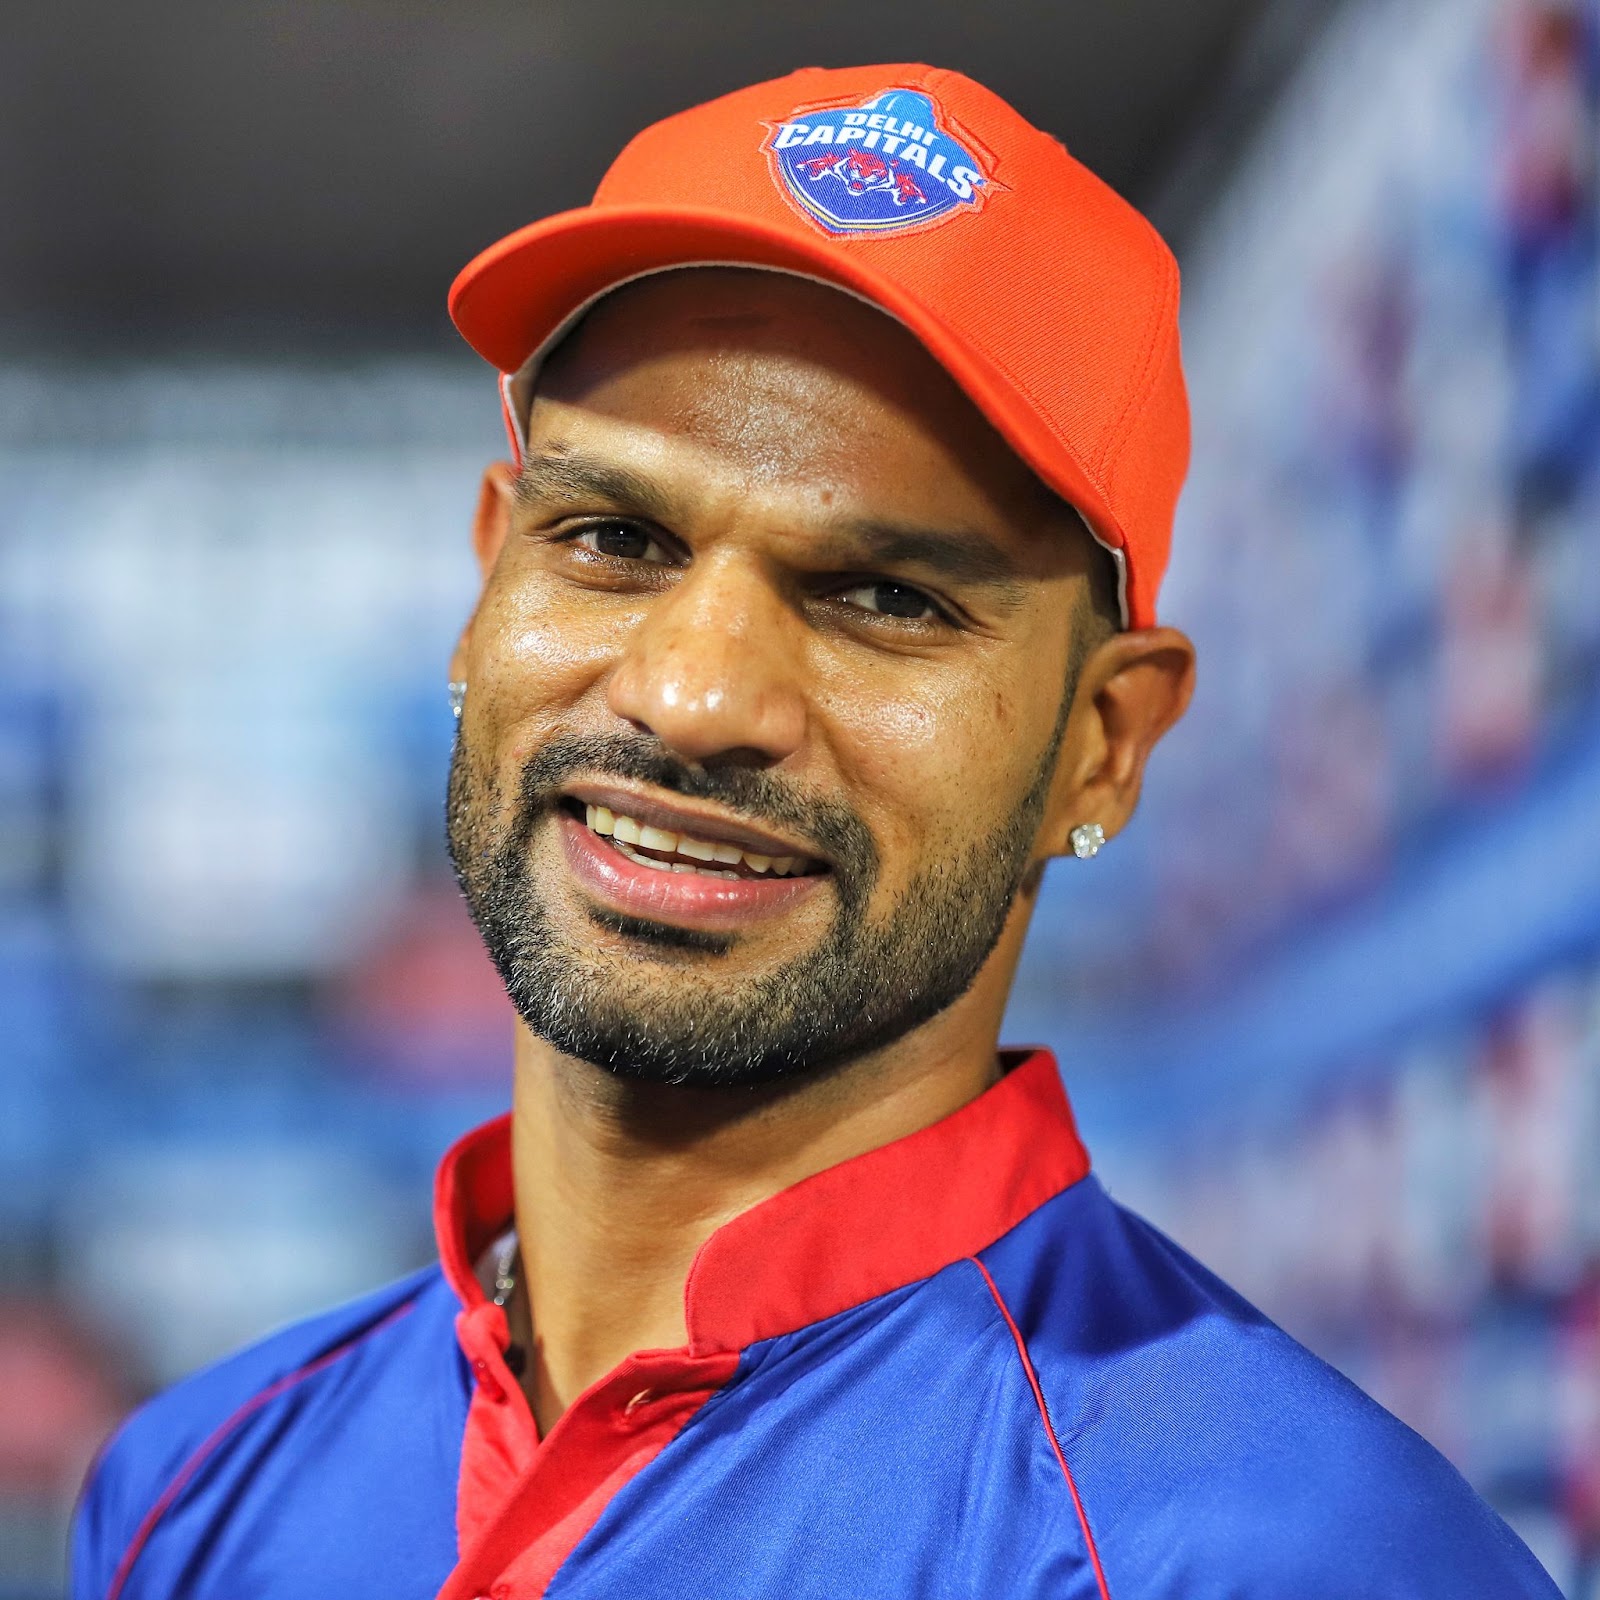 Shikhar Dhawan pictured with the orange cap atop his head